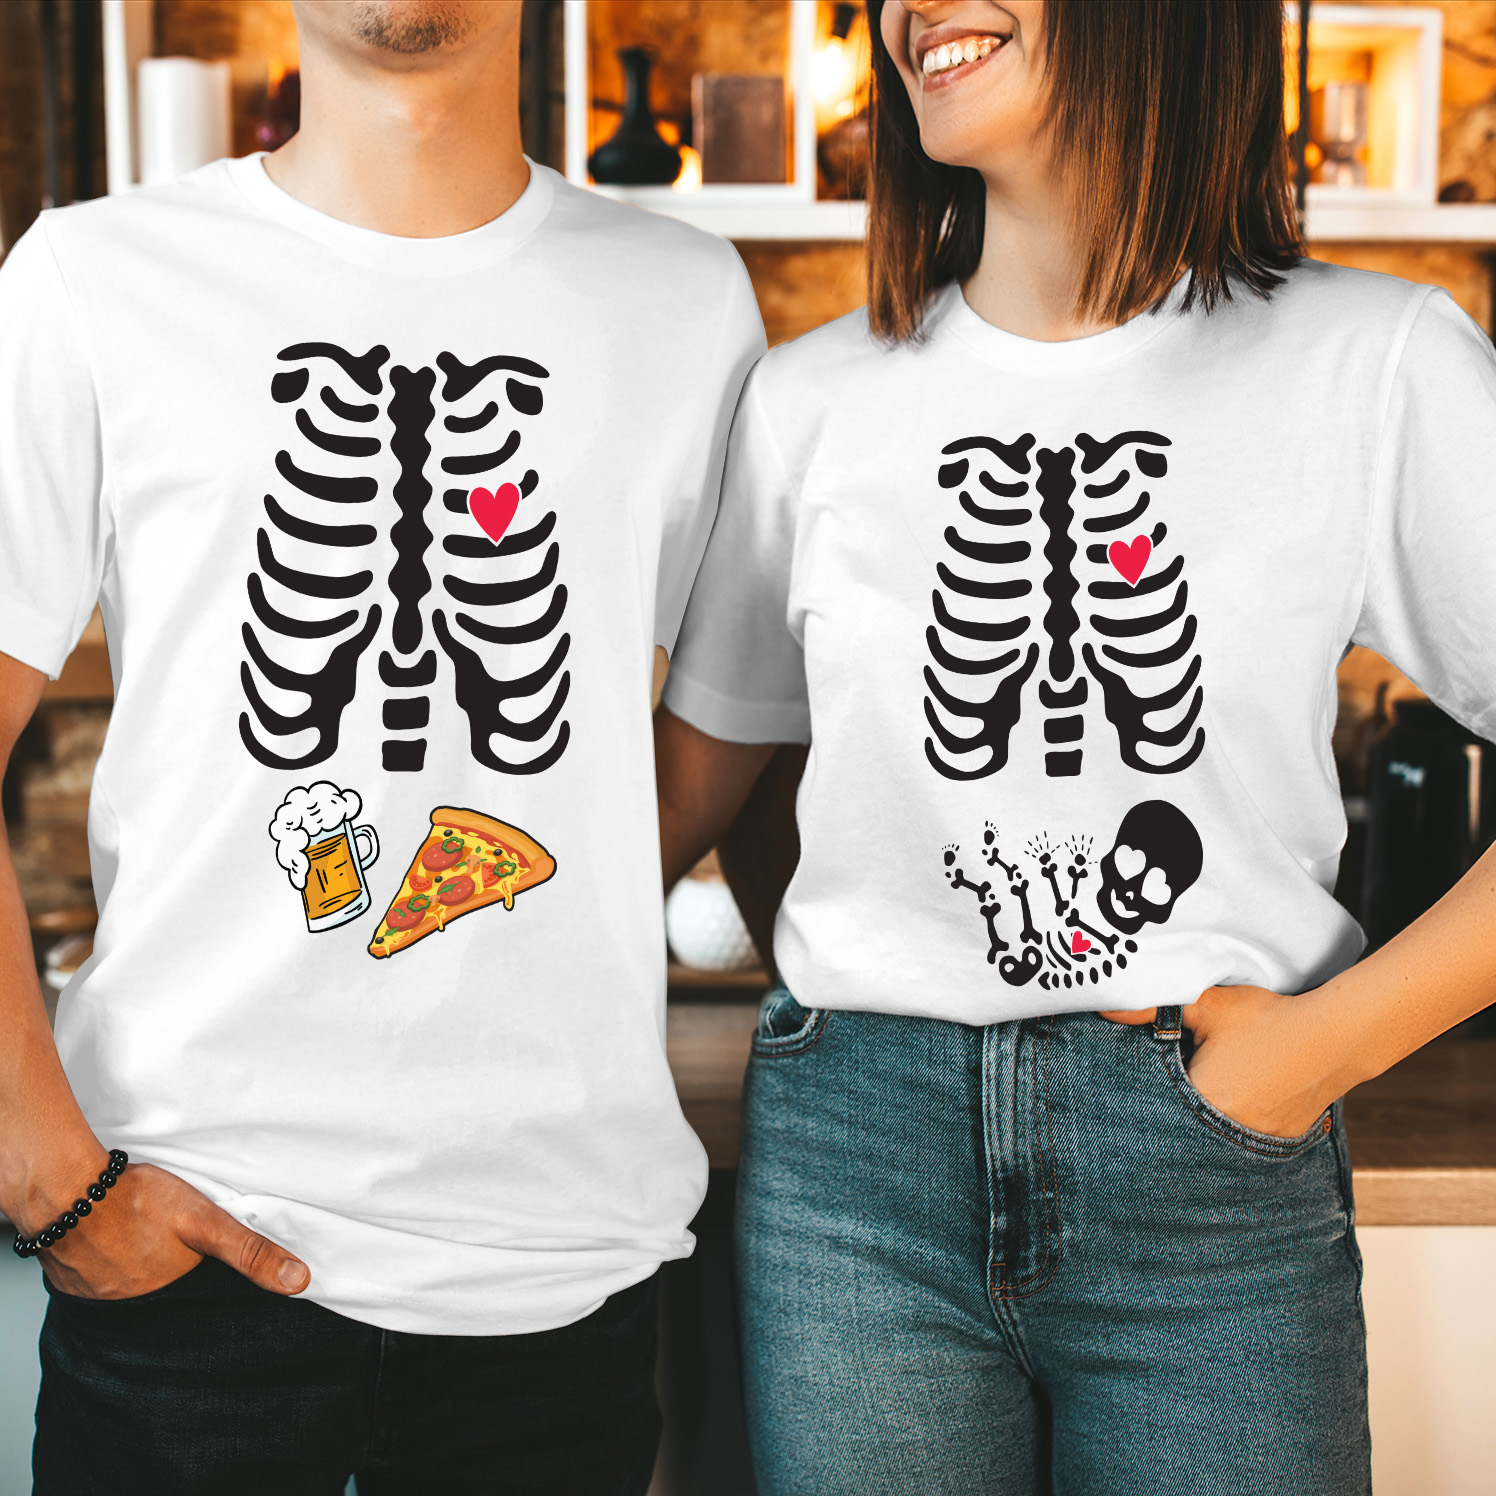 Beer and Pizza Skeleton Ribcage Halloween Maternity T-Shirt Funny Couple Costume Pregnant Belly Skeleton Baby Mom Mum to Be Pregnancy Announcement Tee Parents T Shirt